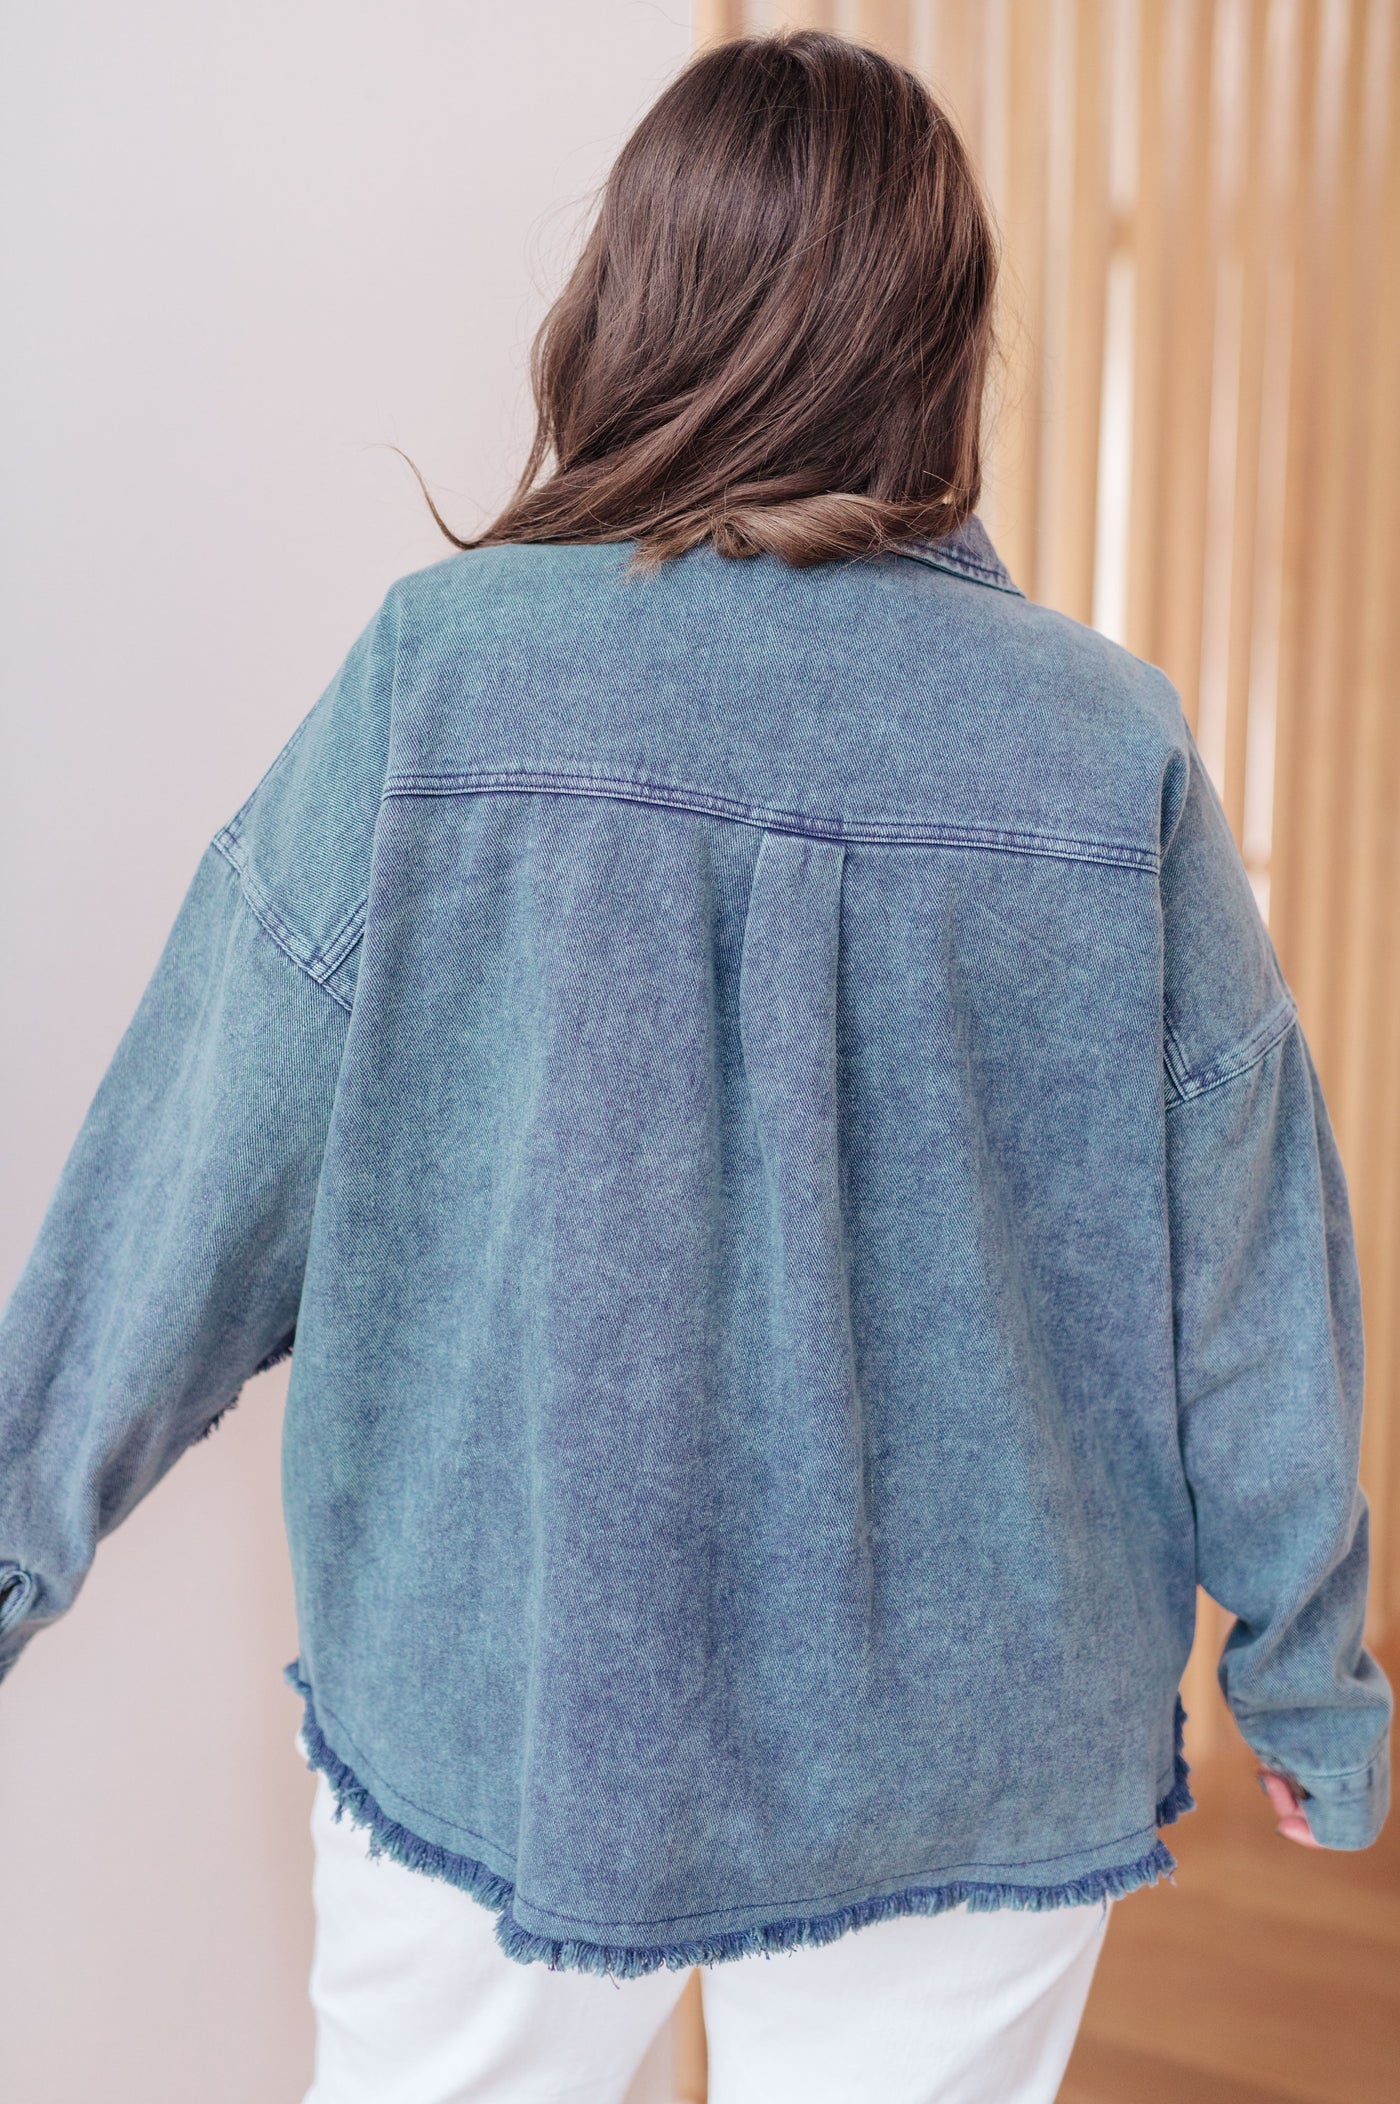 Introducing the Just In Case Mineral Wash Shacket! Made with mineral wash denim twill, this shacket features a raw hem, front pocket, and button front.